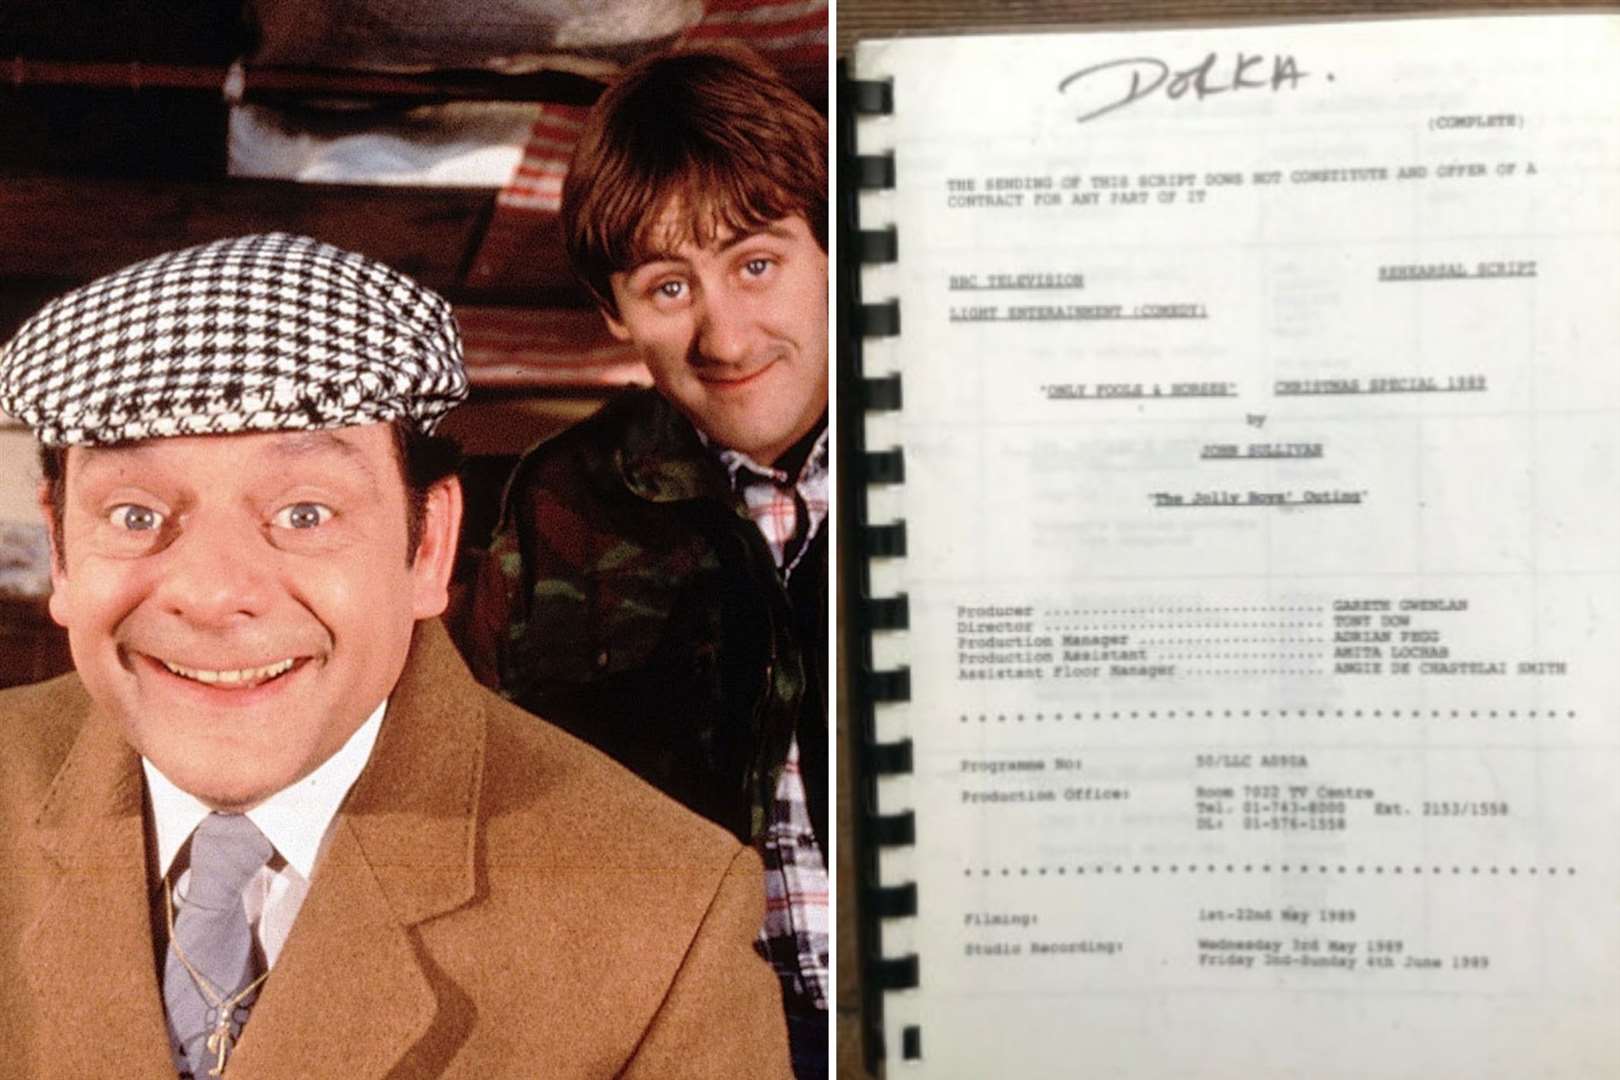 Del Boy would be very proud of the final selling price